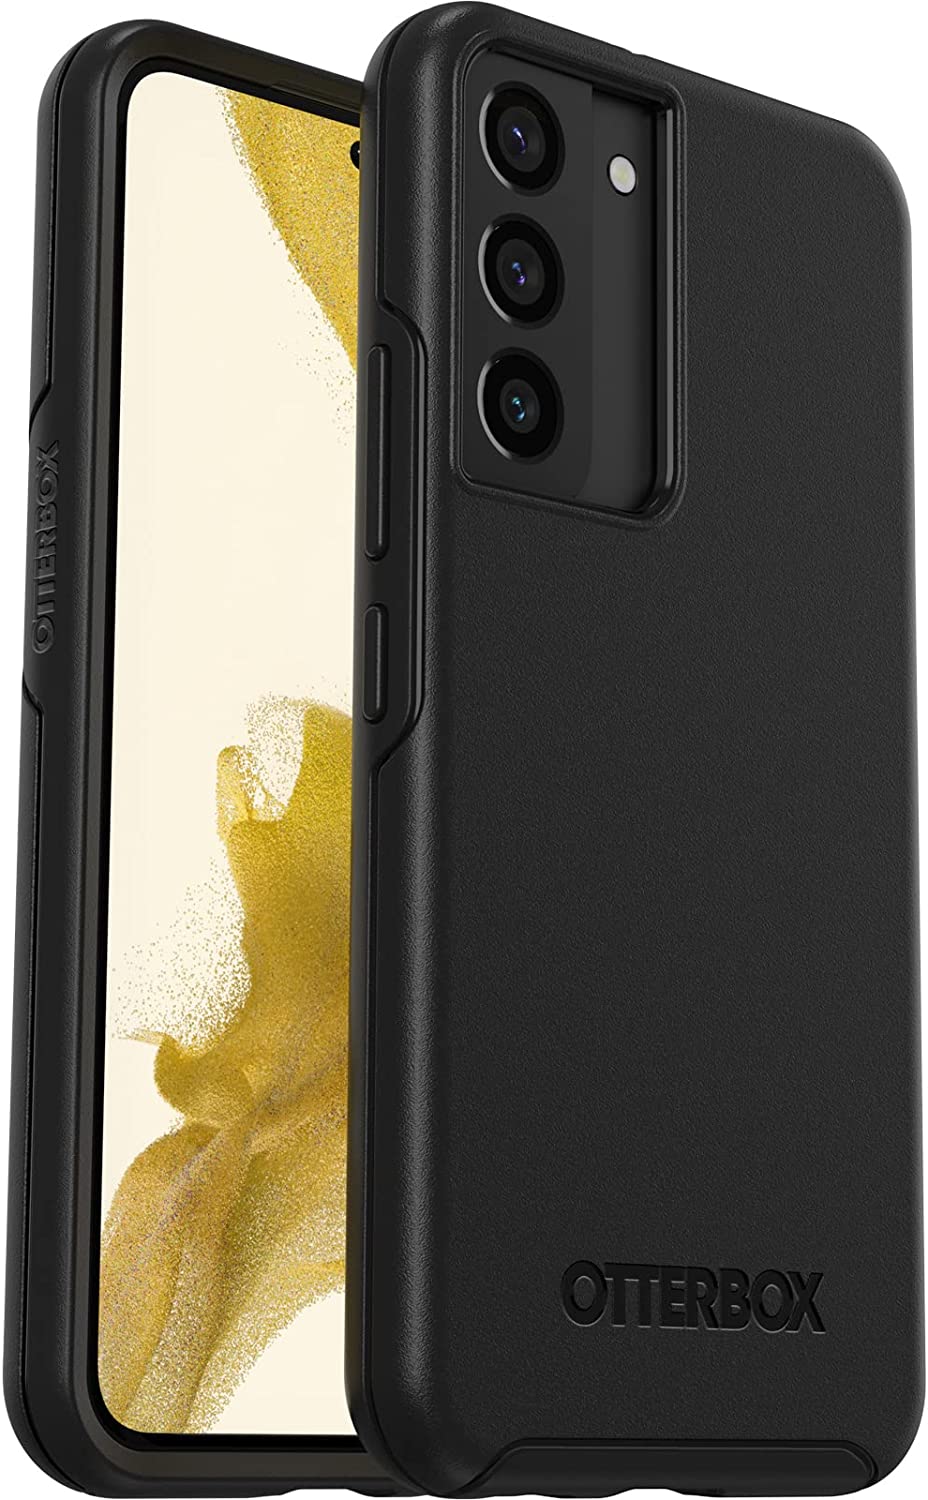 OtterBox SYMMETRY SERIES Antimicrobial Case for Samsung Galaxy S22 - Black (New)